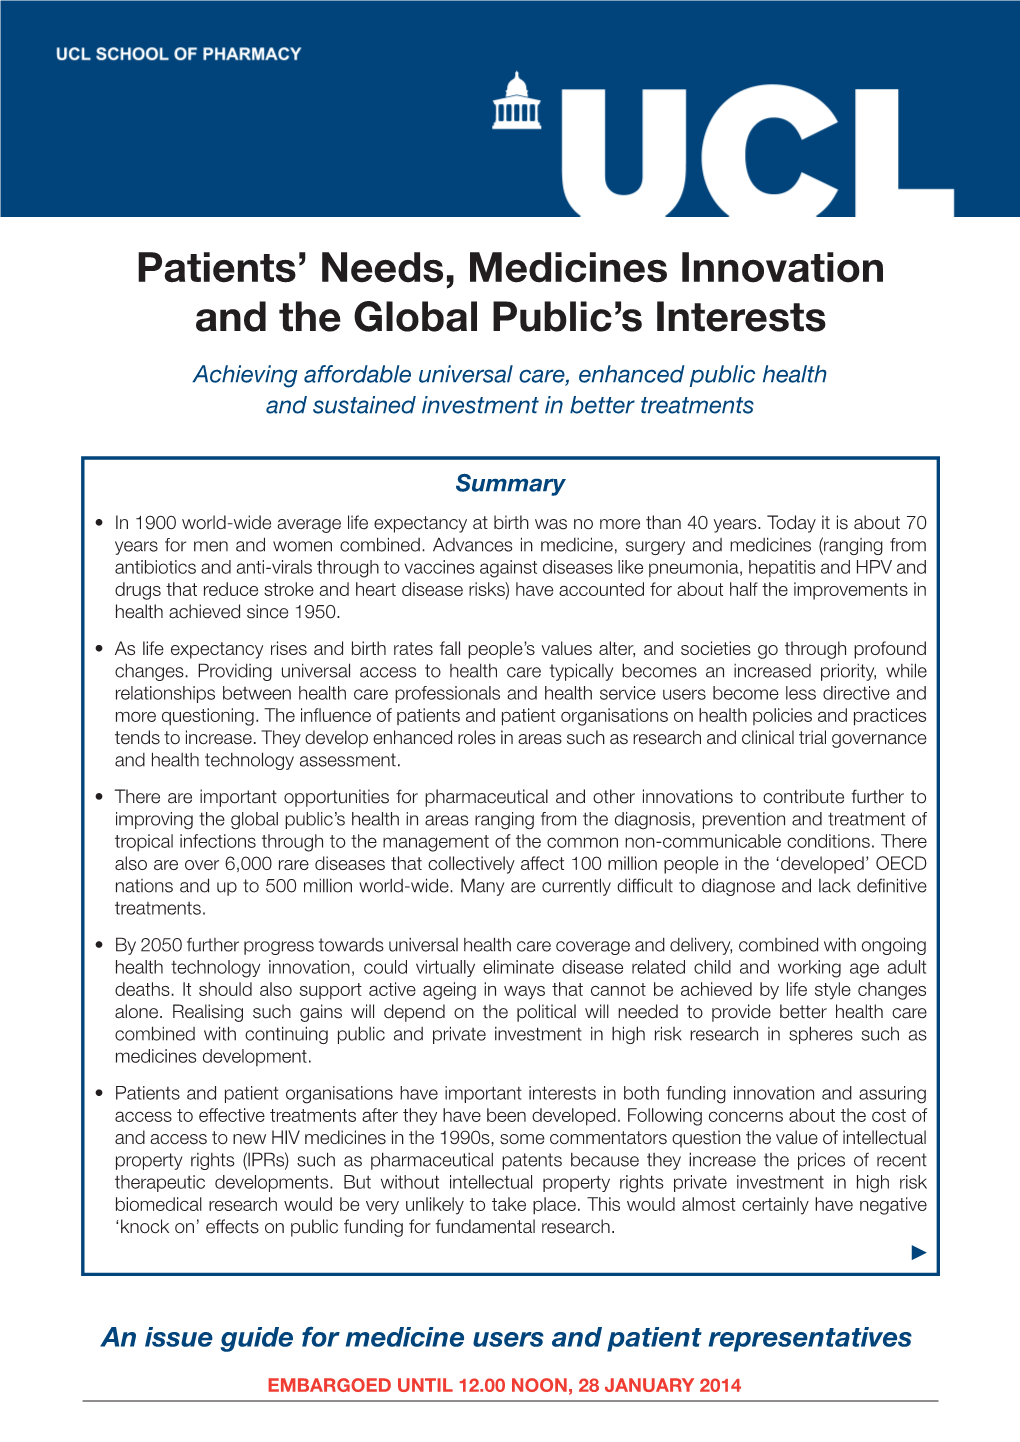 Patients' Needs, Medicines Innovation and the Global Public's Interests